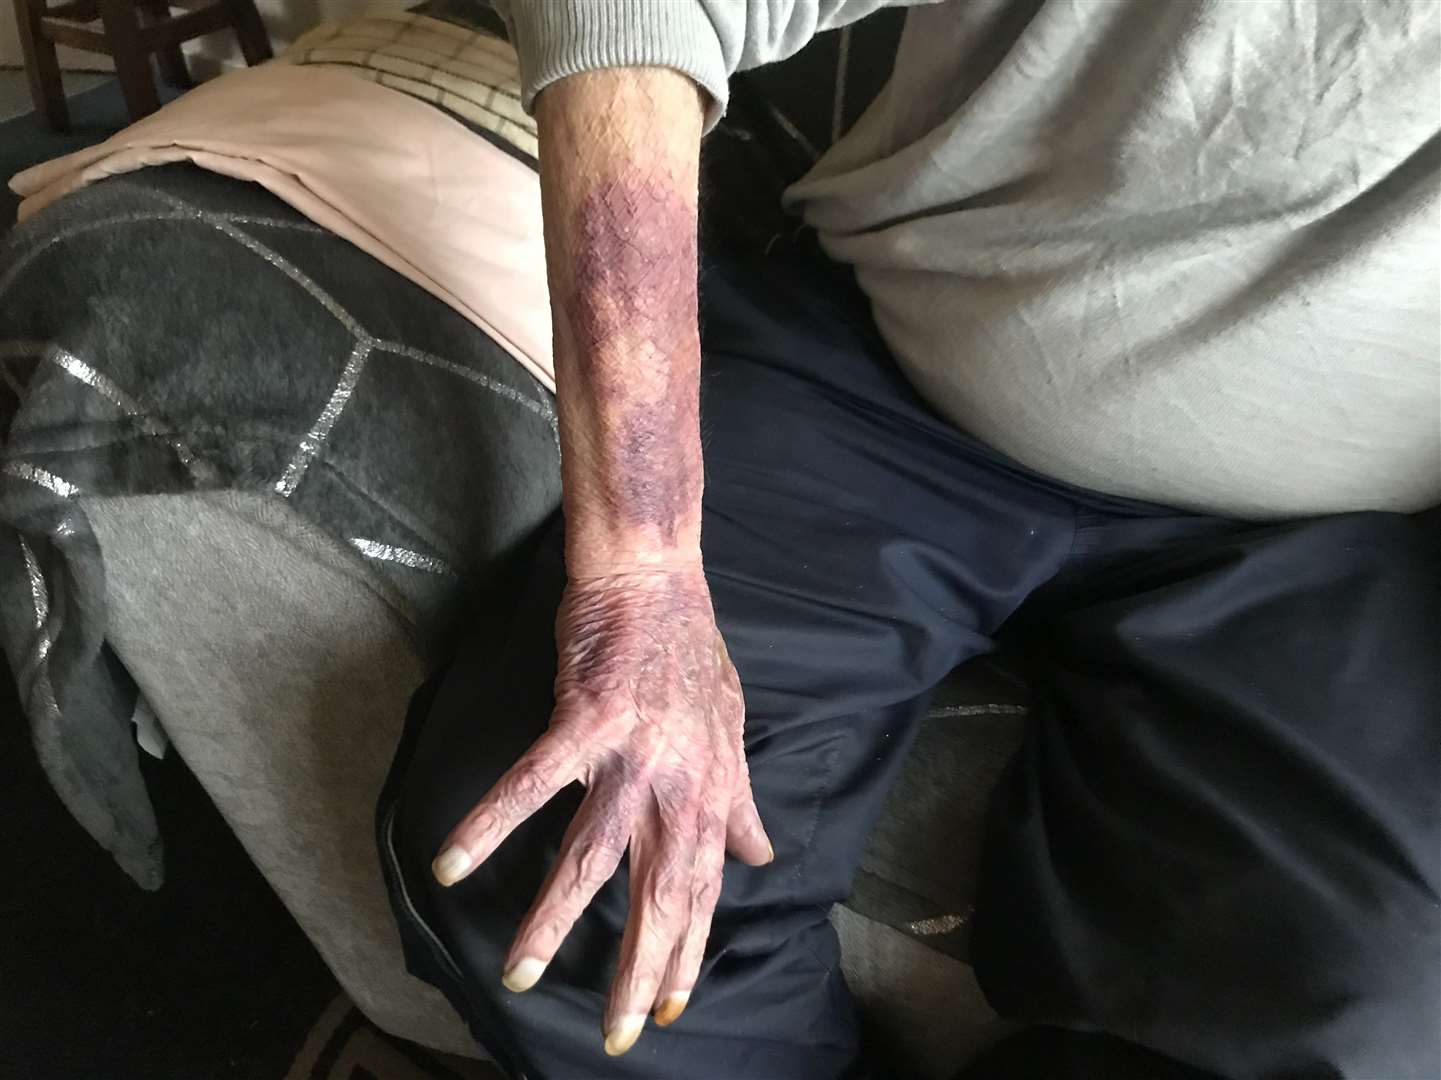 Some of the bruises on Arthur's arm